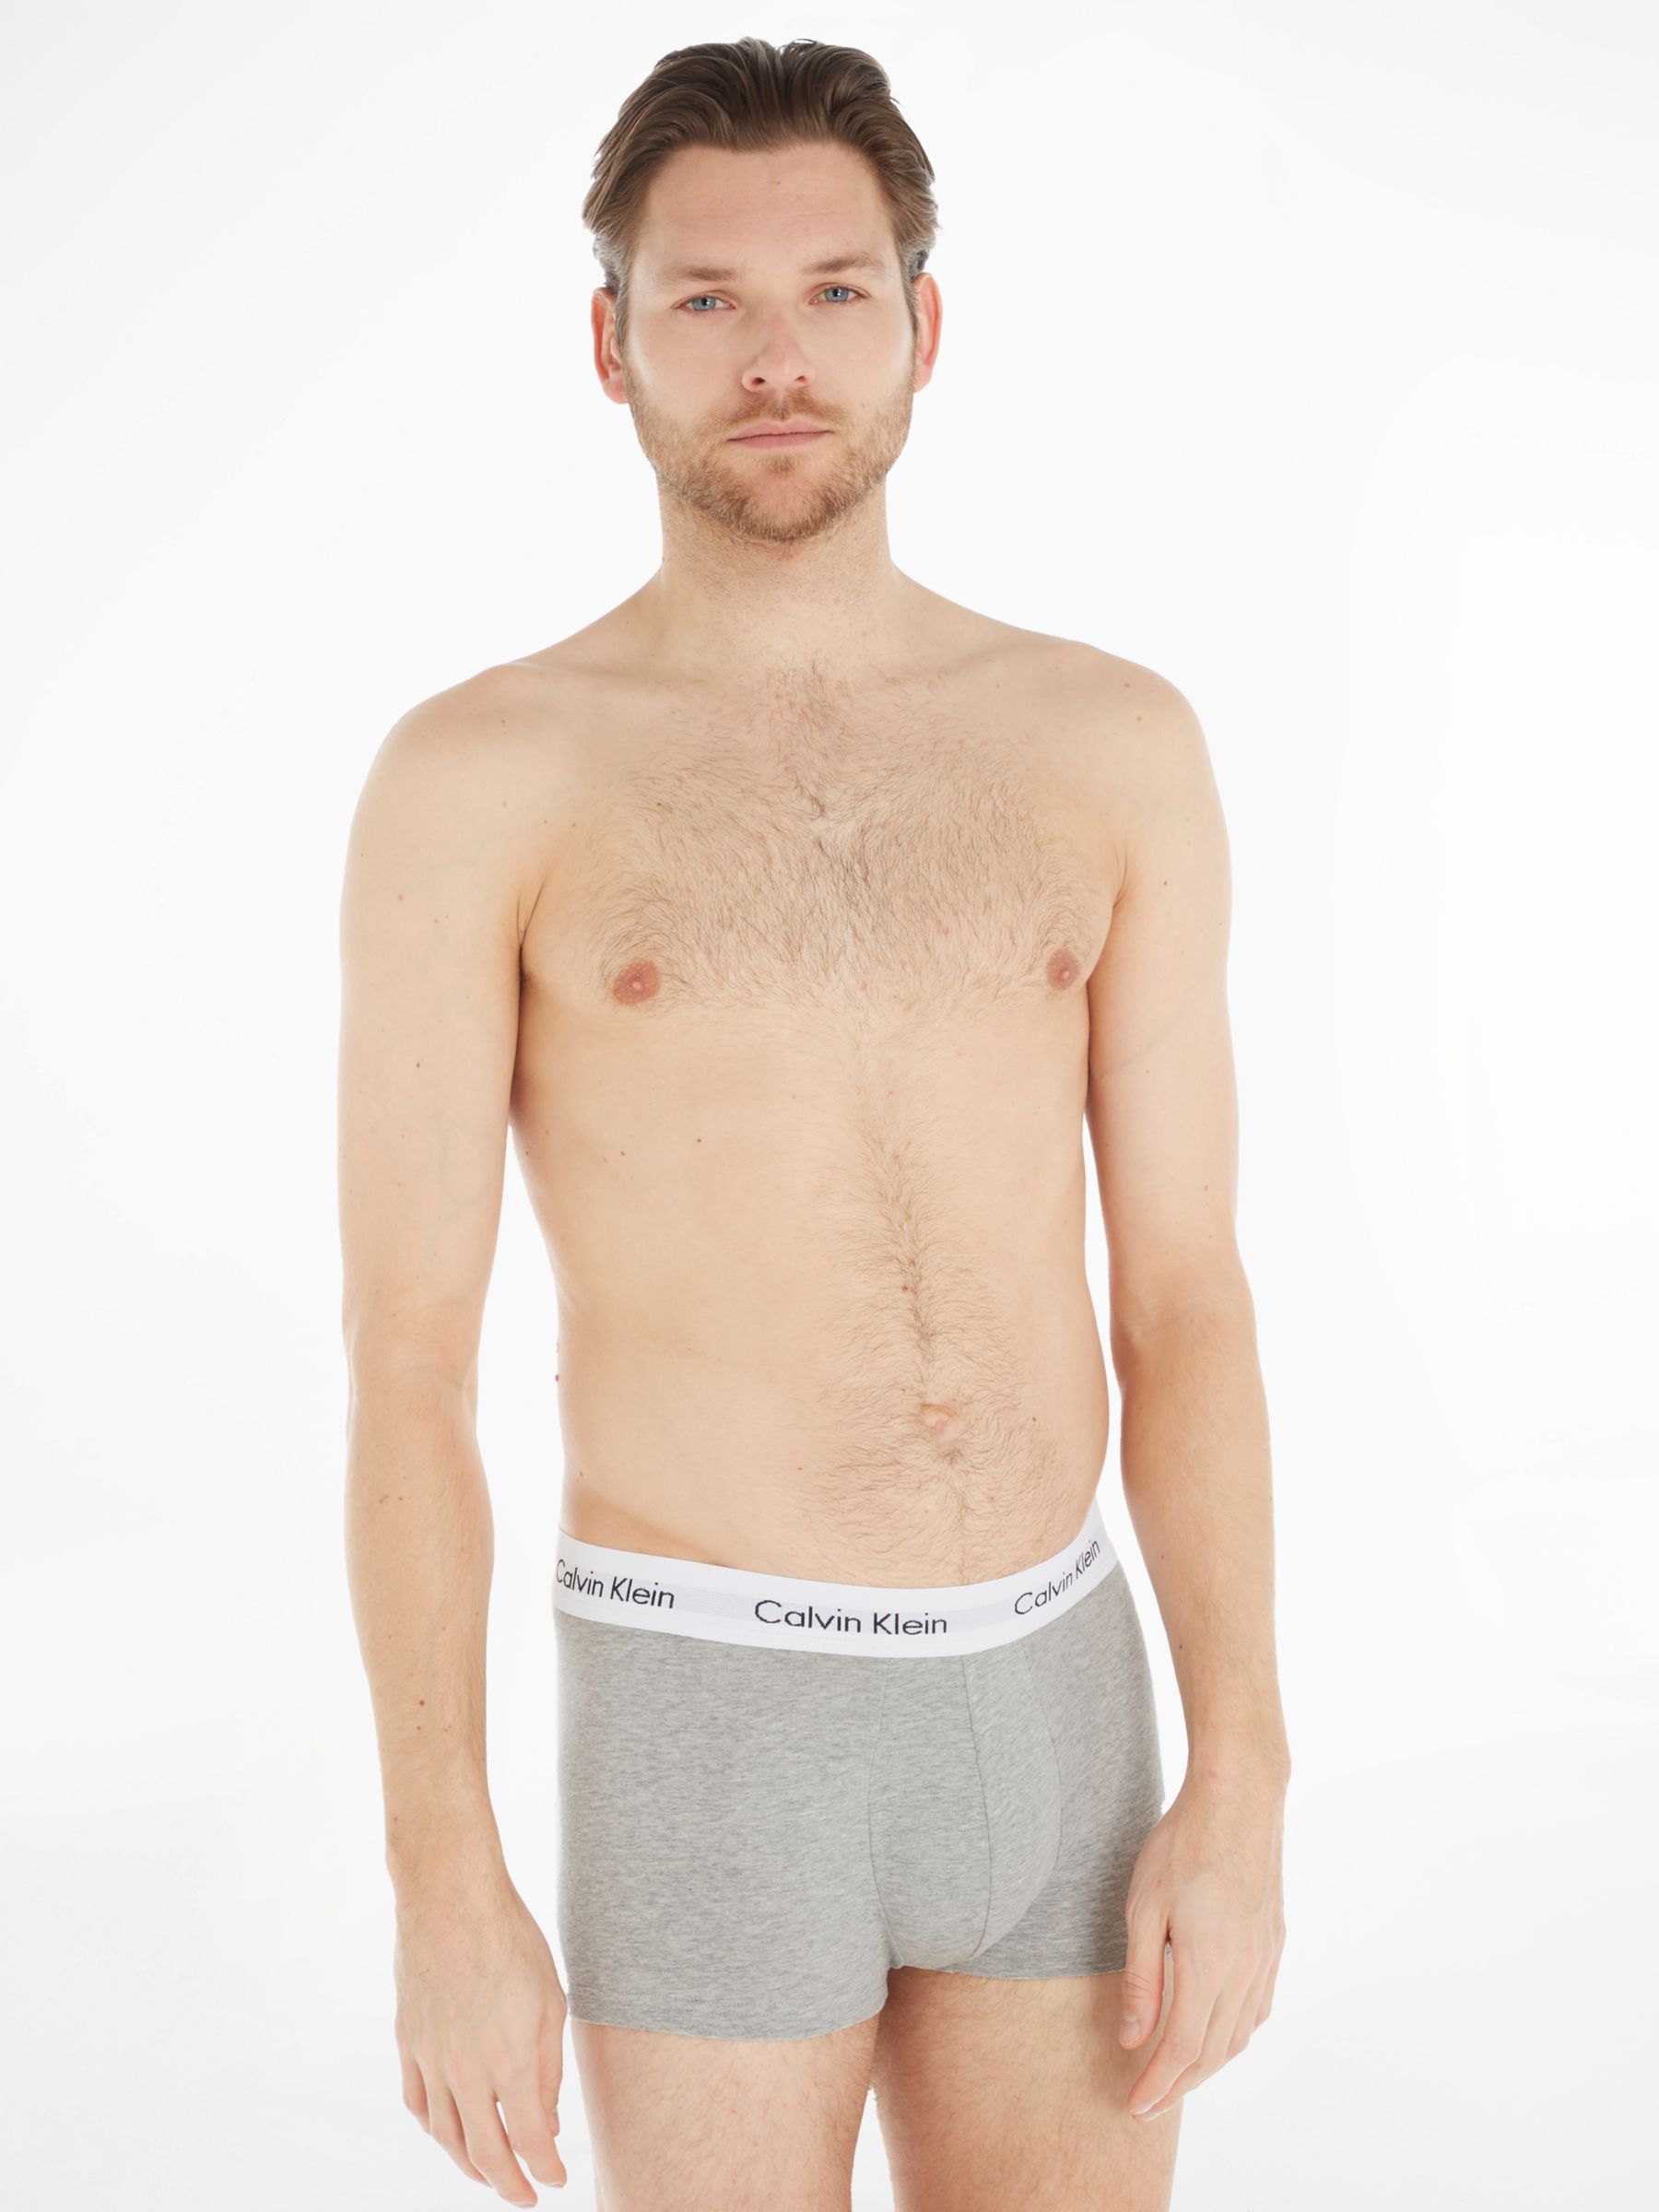 Calvin Klein Low Rise Trunks, Pack of Black/White/Grey Heather at John Lewis & Partners